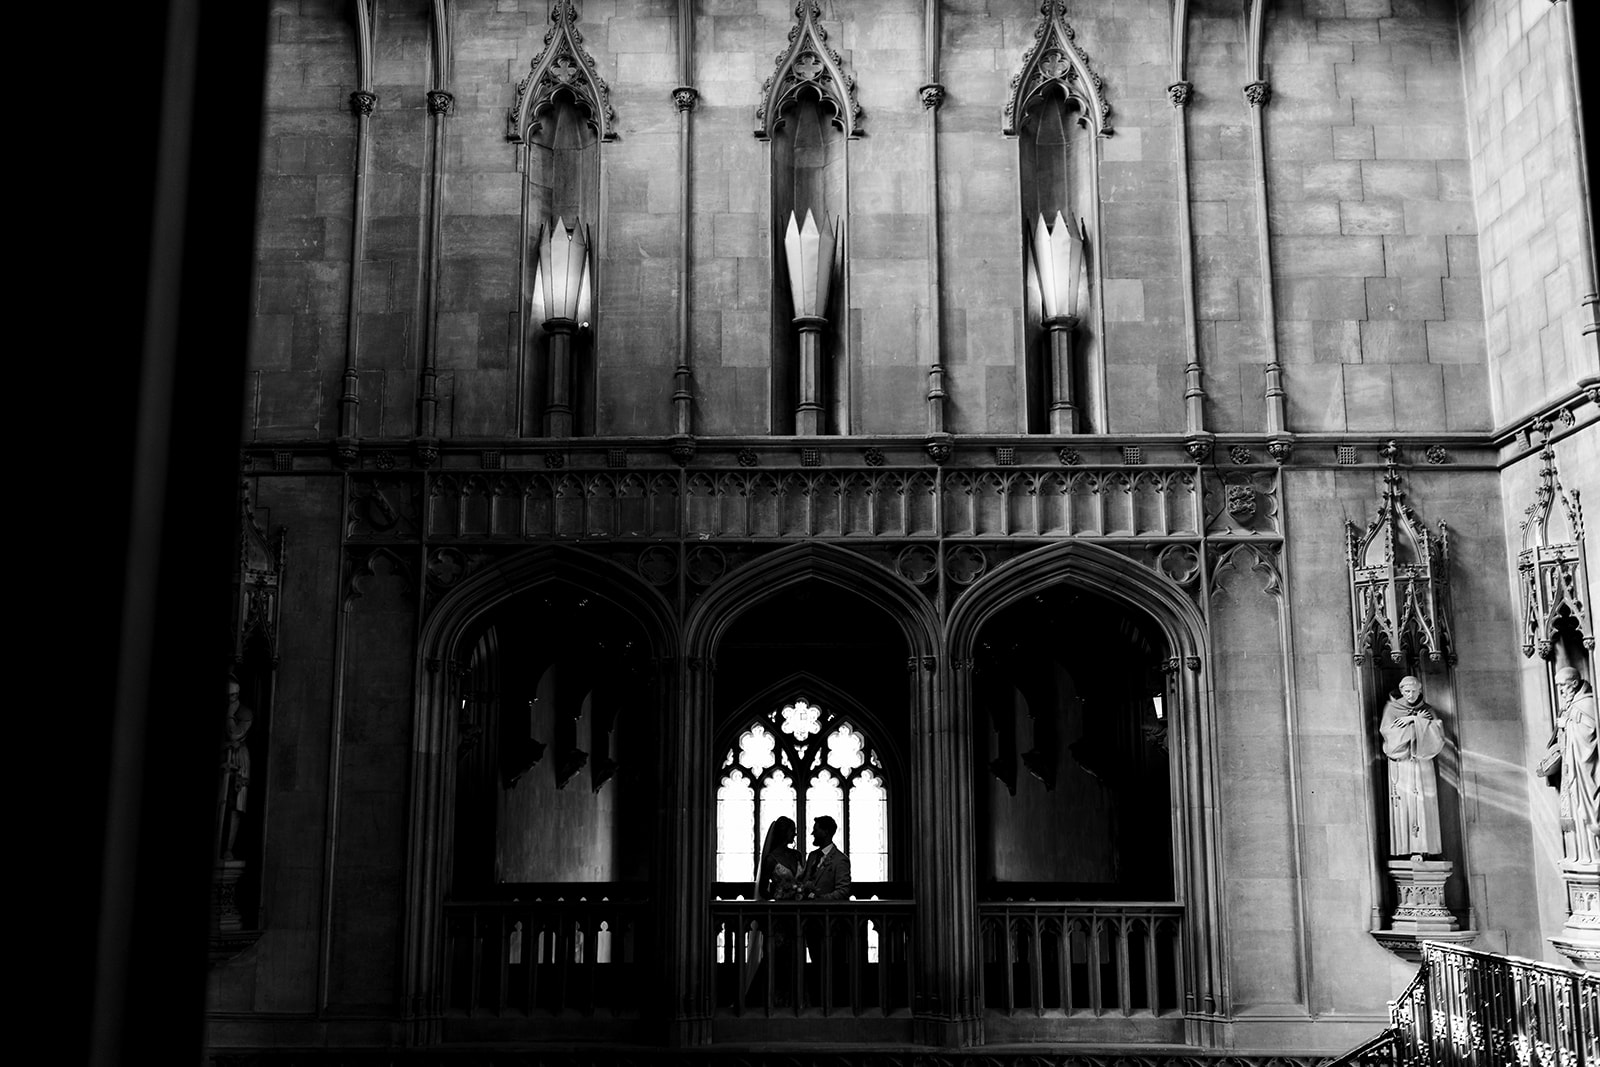 Bride and Groom on balcony inside Ashridge House, image is in black and white 